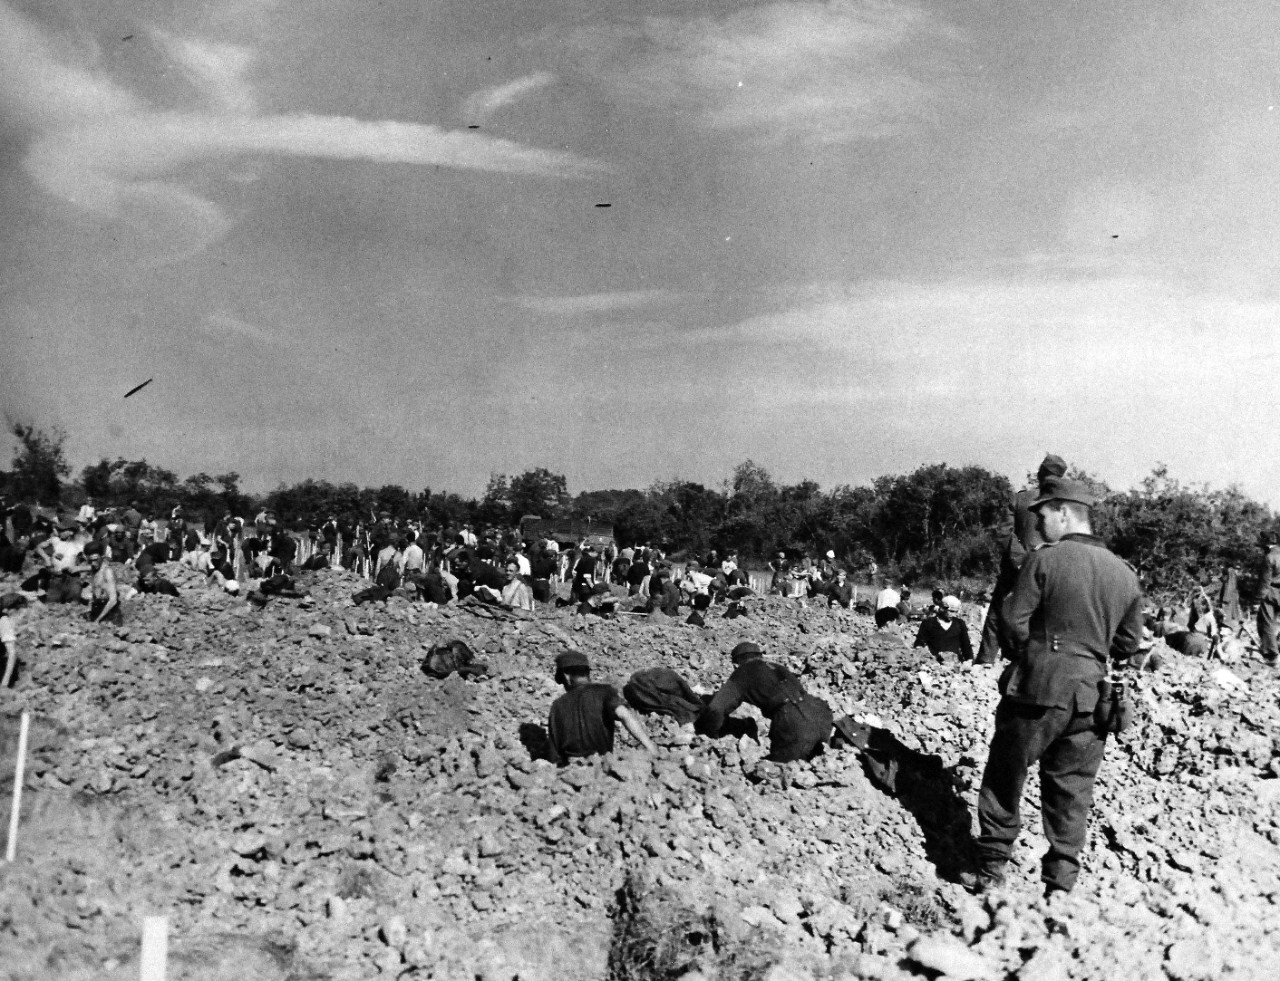 80-G-285231:  Normandy Invasion, German Prisoners, June 1944. German prisoners, captured during invasion of Normandy, France, digging graves overlooking Dog Red beach.   Photograph released November 7, 1944.  U.S. Navy photograph, now in the collections of the National Archives.  (2016/03/15).